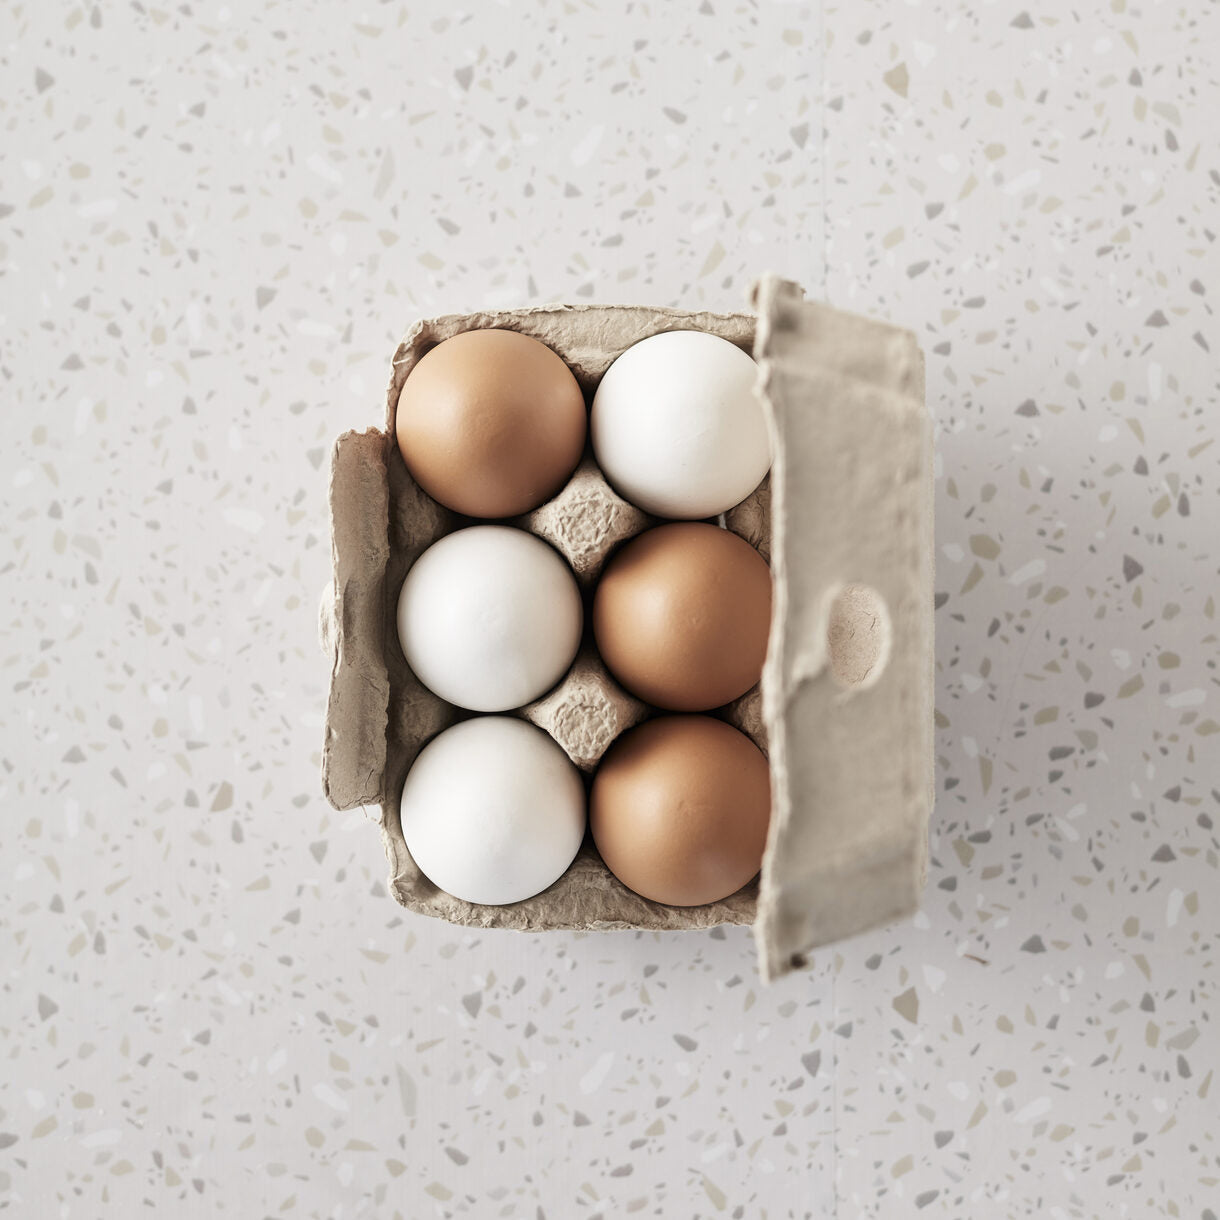 6 wooden eggs in a paper carton from Kids concept